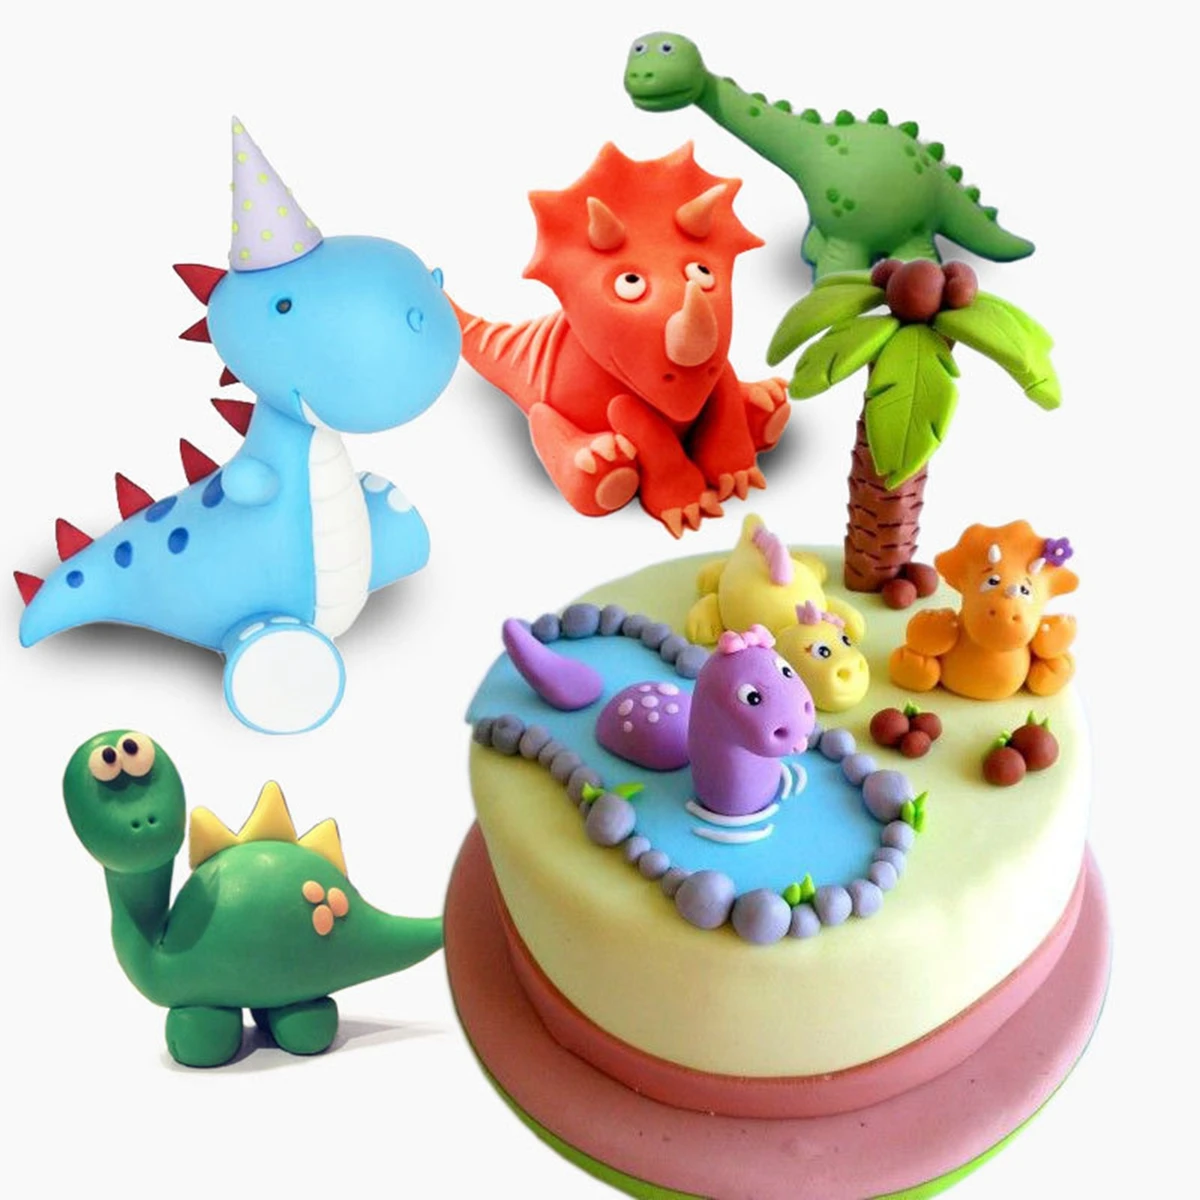 Dinosaur Party Accessories Cake Topper Happy Birthday Party Decorations Kids Boys Soft Cake Decorating Supplies Festival Events